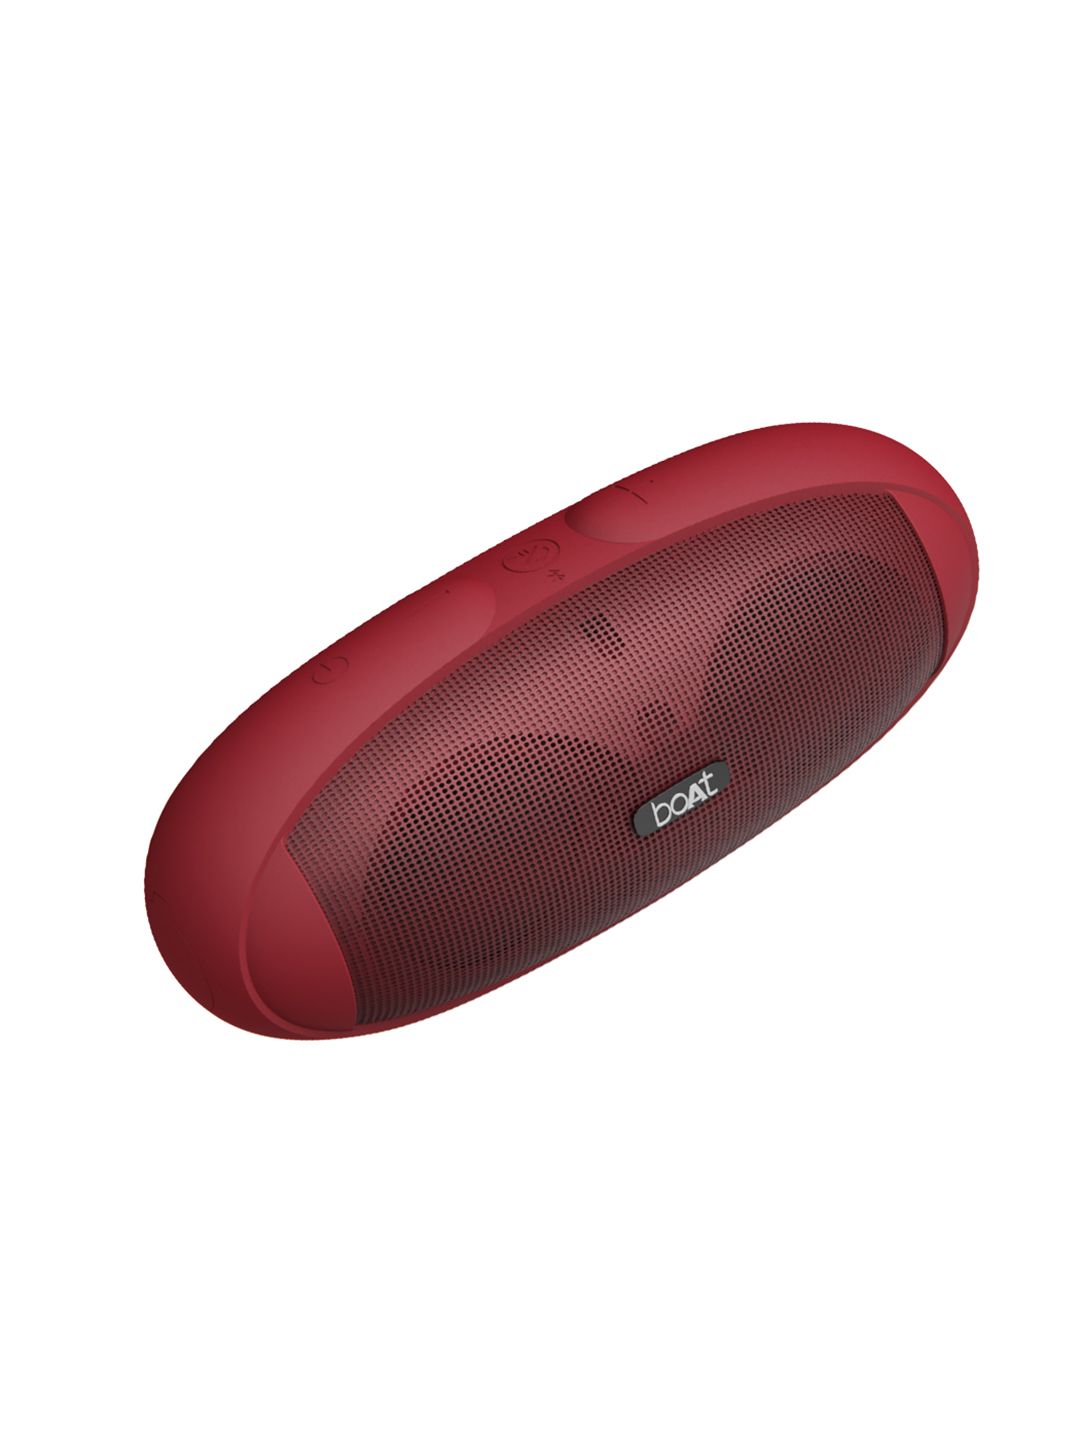 boAt Red Rugby Plus M 16W Bluetooth Speaker Price in India